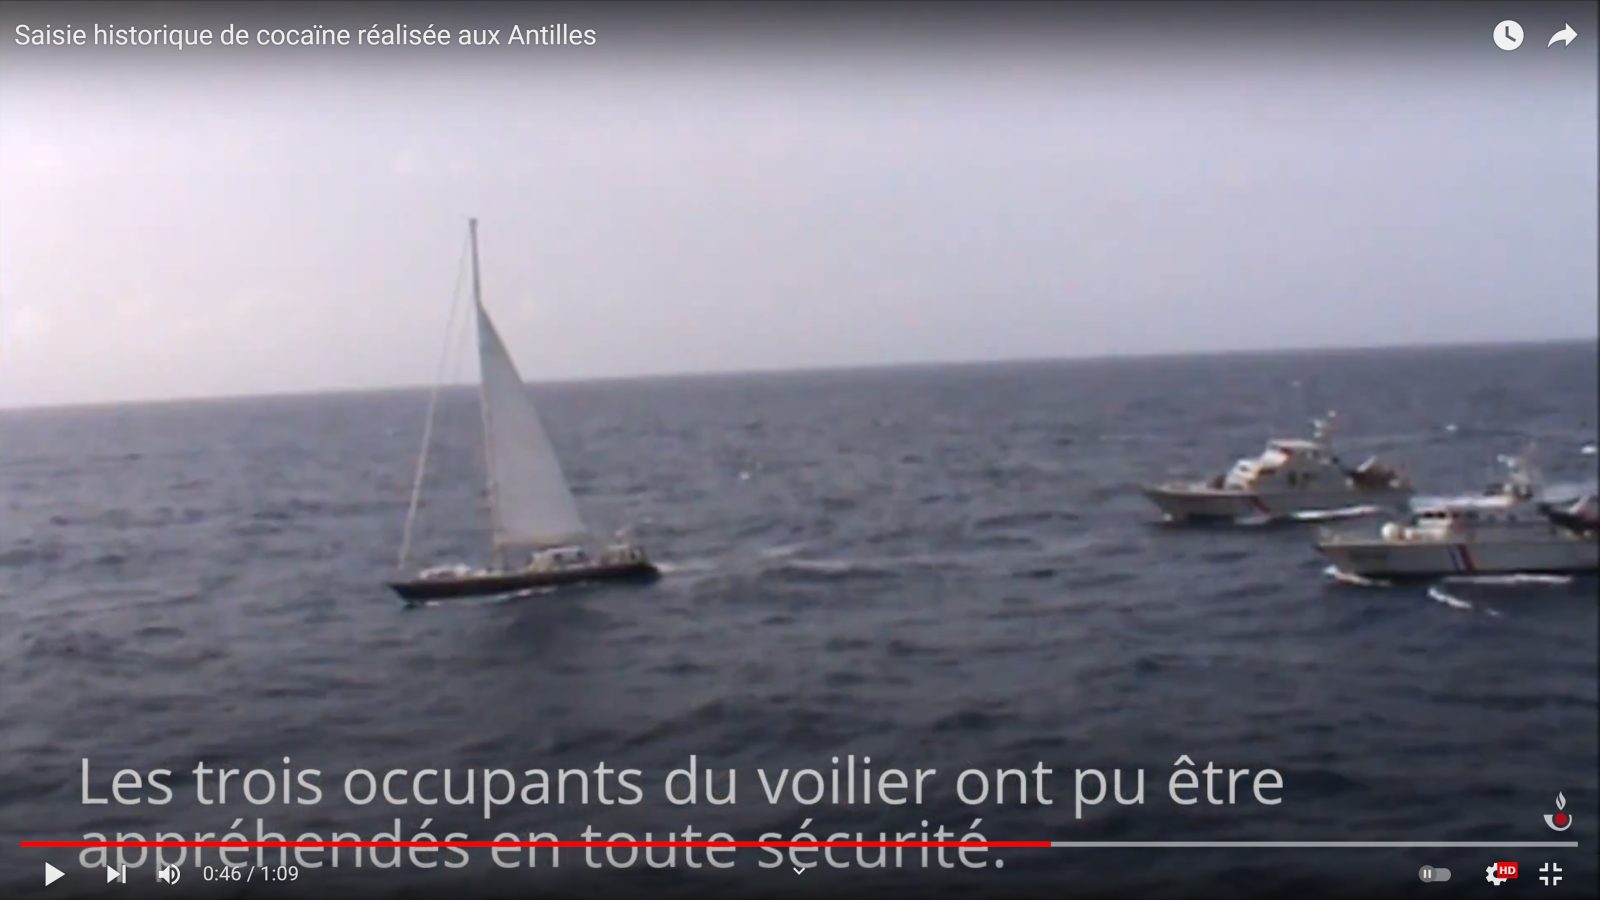 SY Silandra being intercepted with coke off Martinique (Douane Francaise)